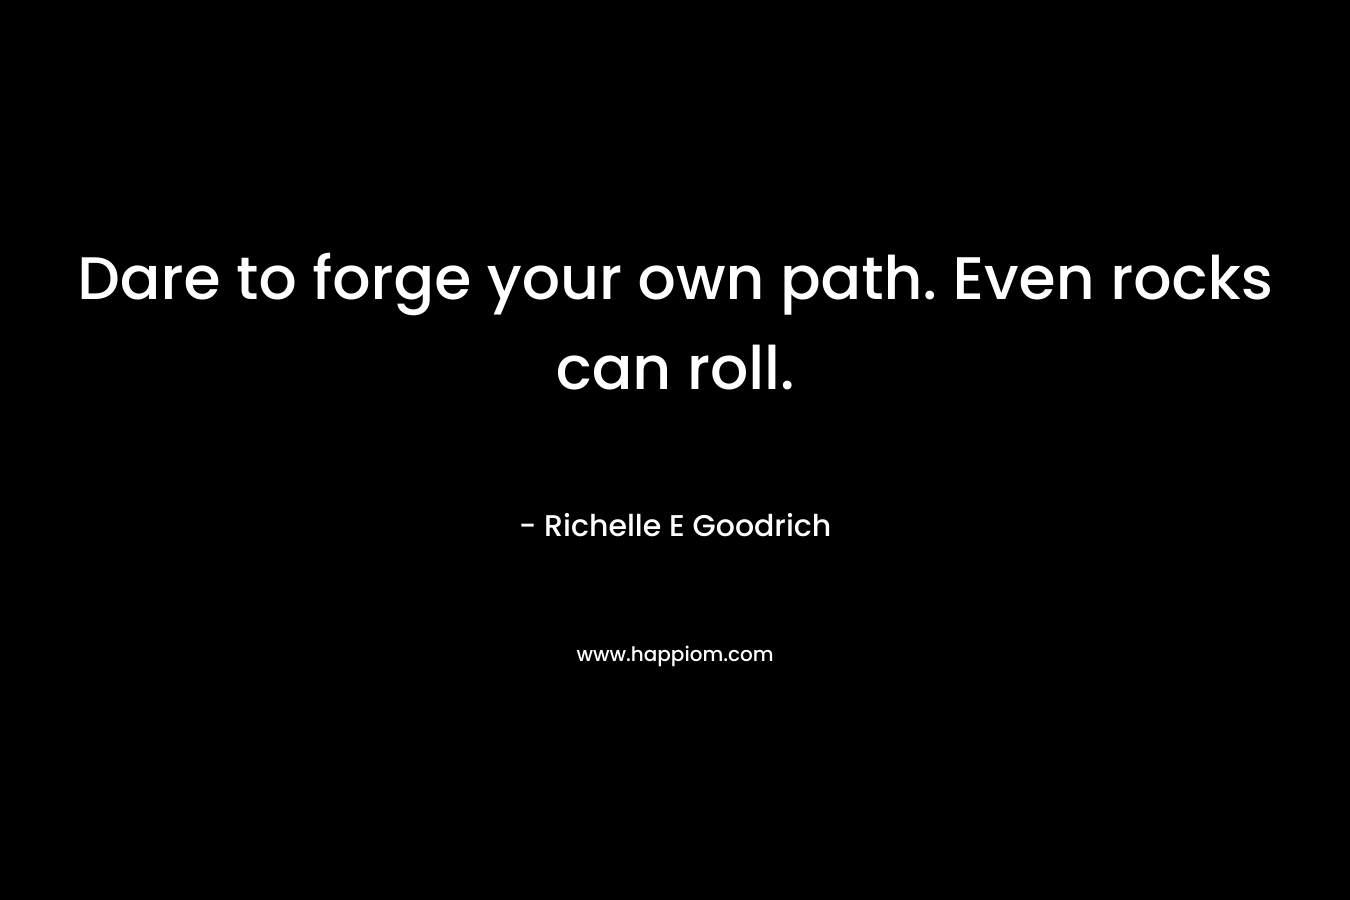 Dare to forge your own path. Even rocks can roll. – Richelle E Goodrich